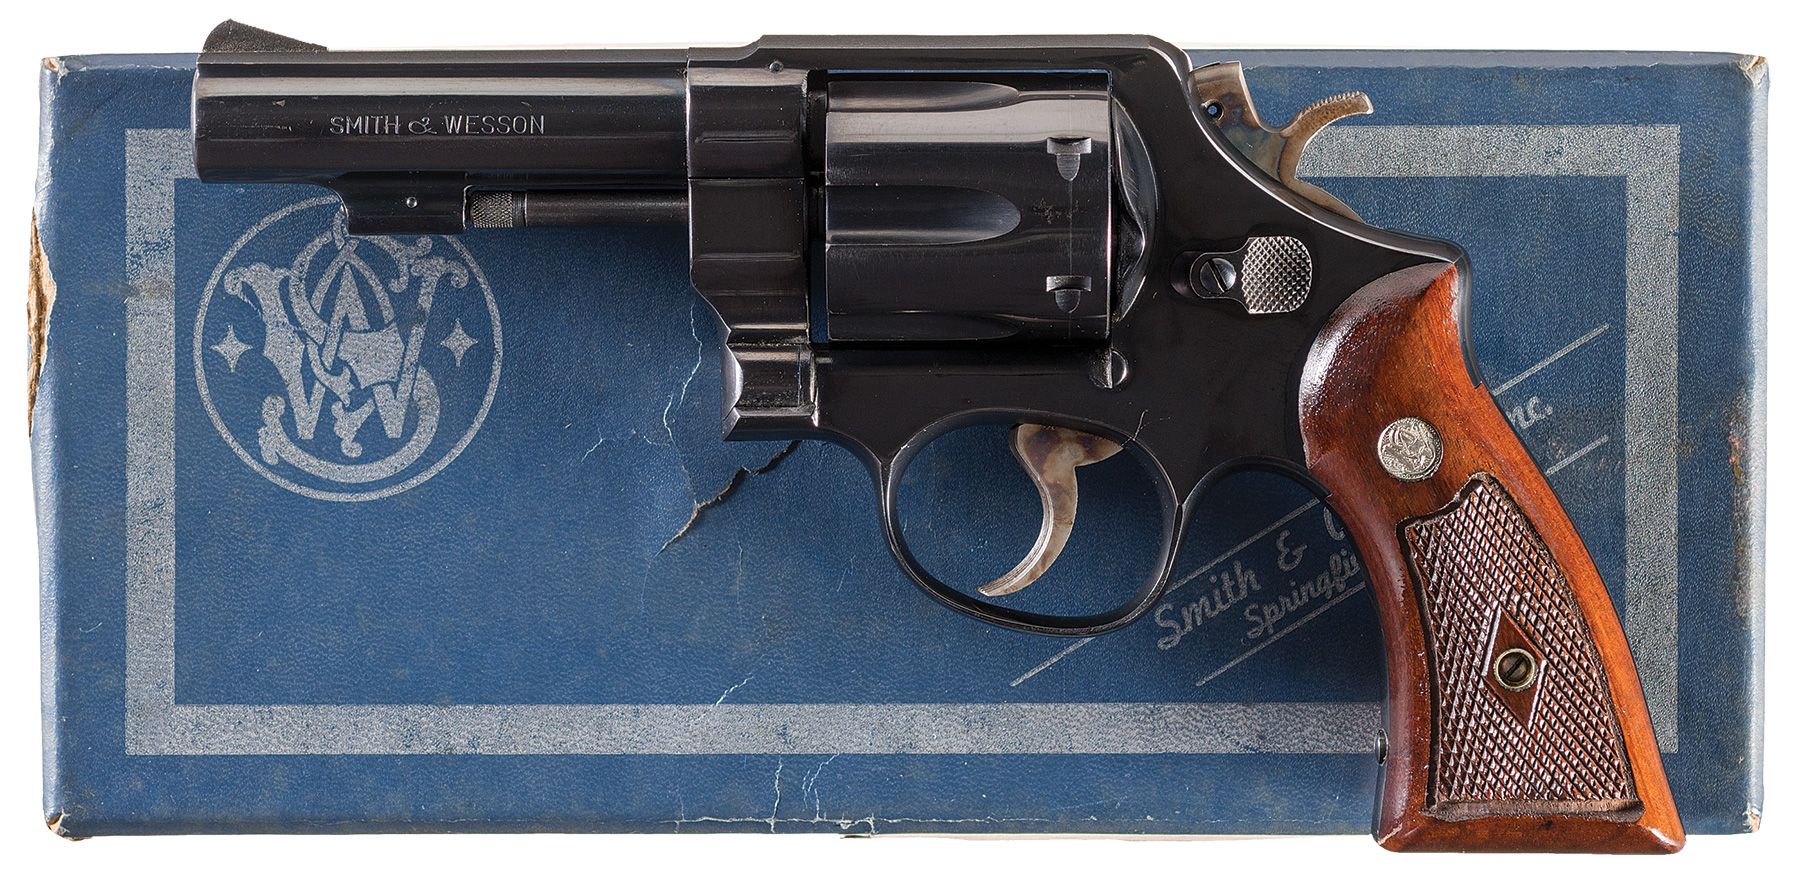 smith-wesson-model-58-double-action-revolver-with-box-rock-island